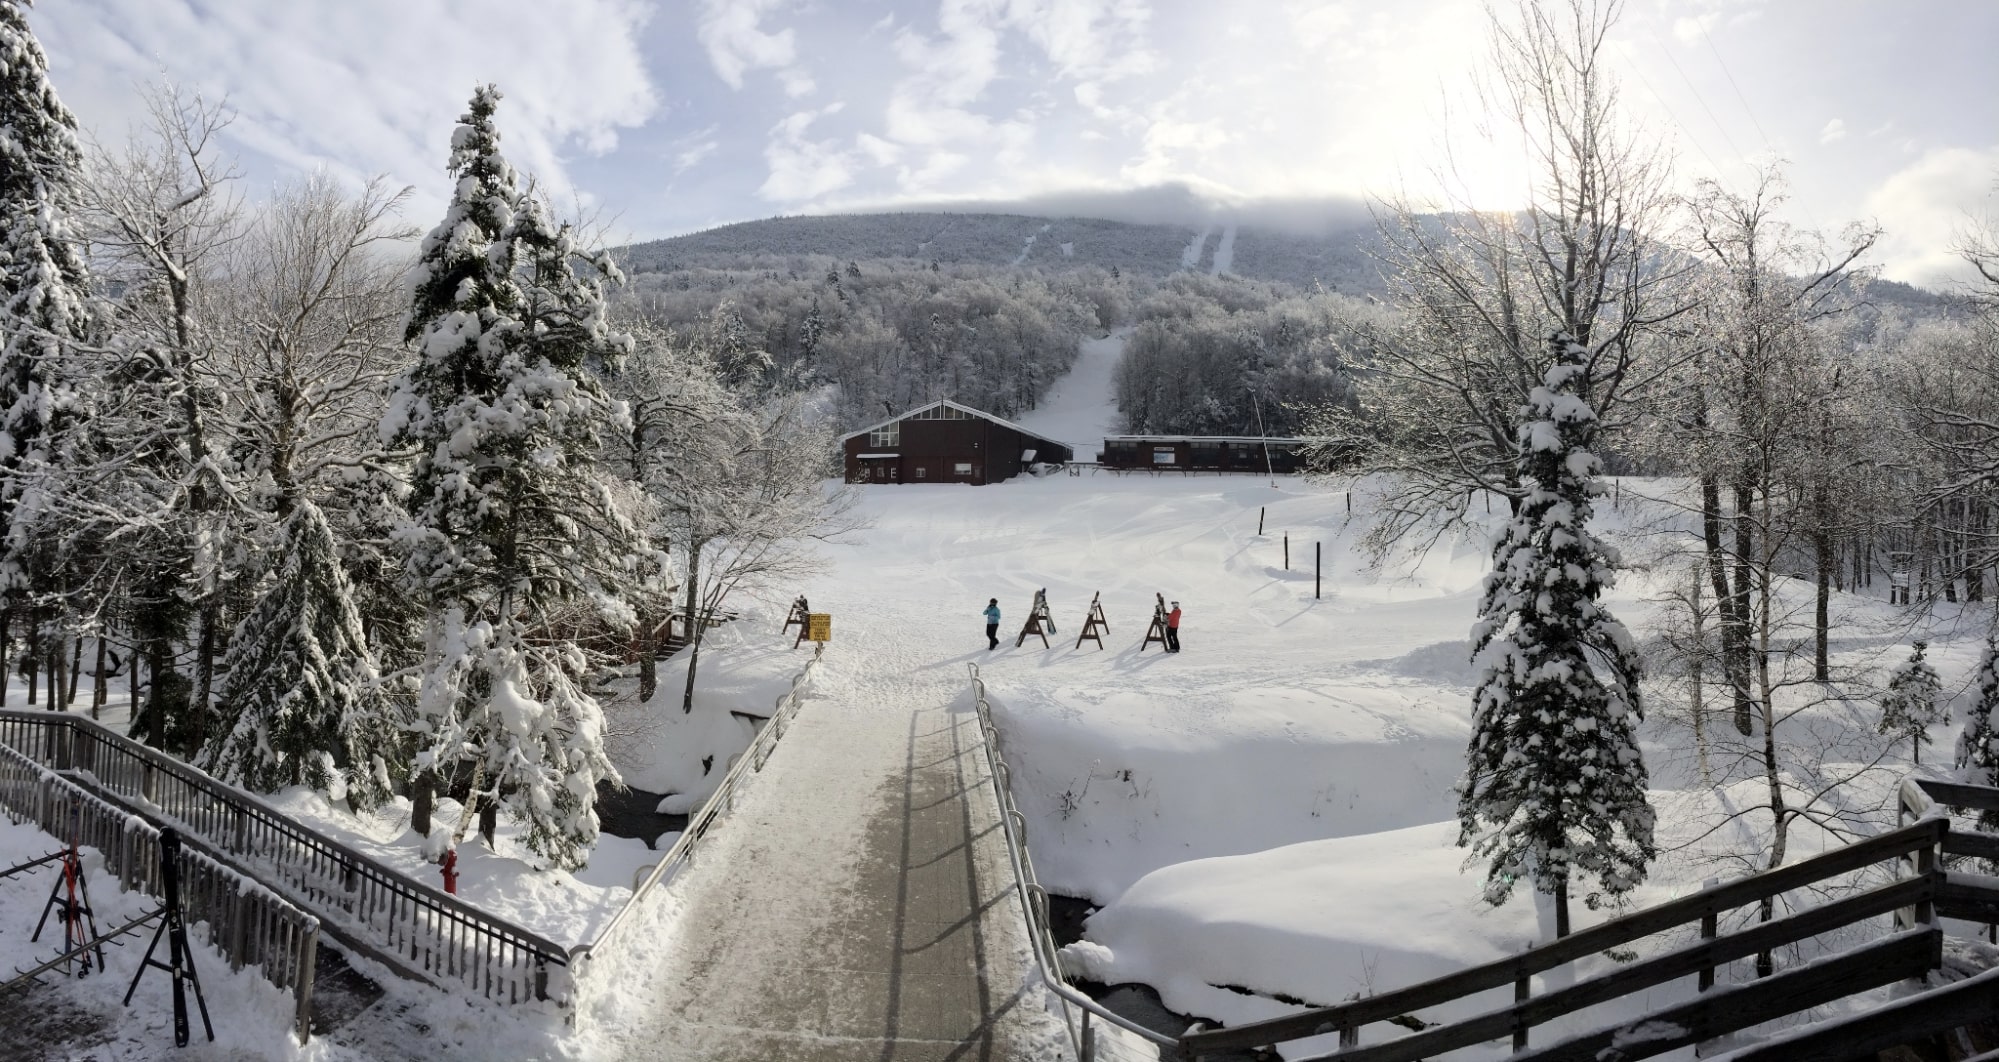 22 Top-Rated Best Ski Resorts & Lodging in New Hampshire: Plan Your Ski Trip